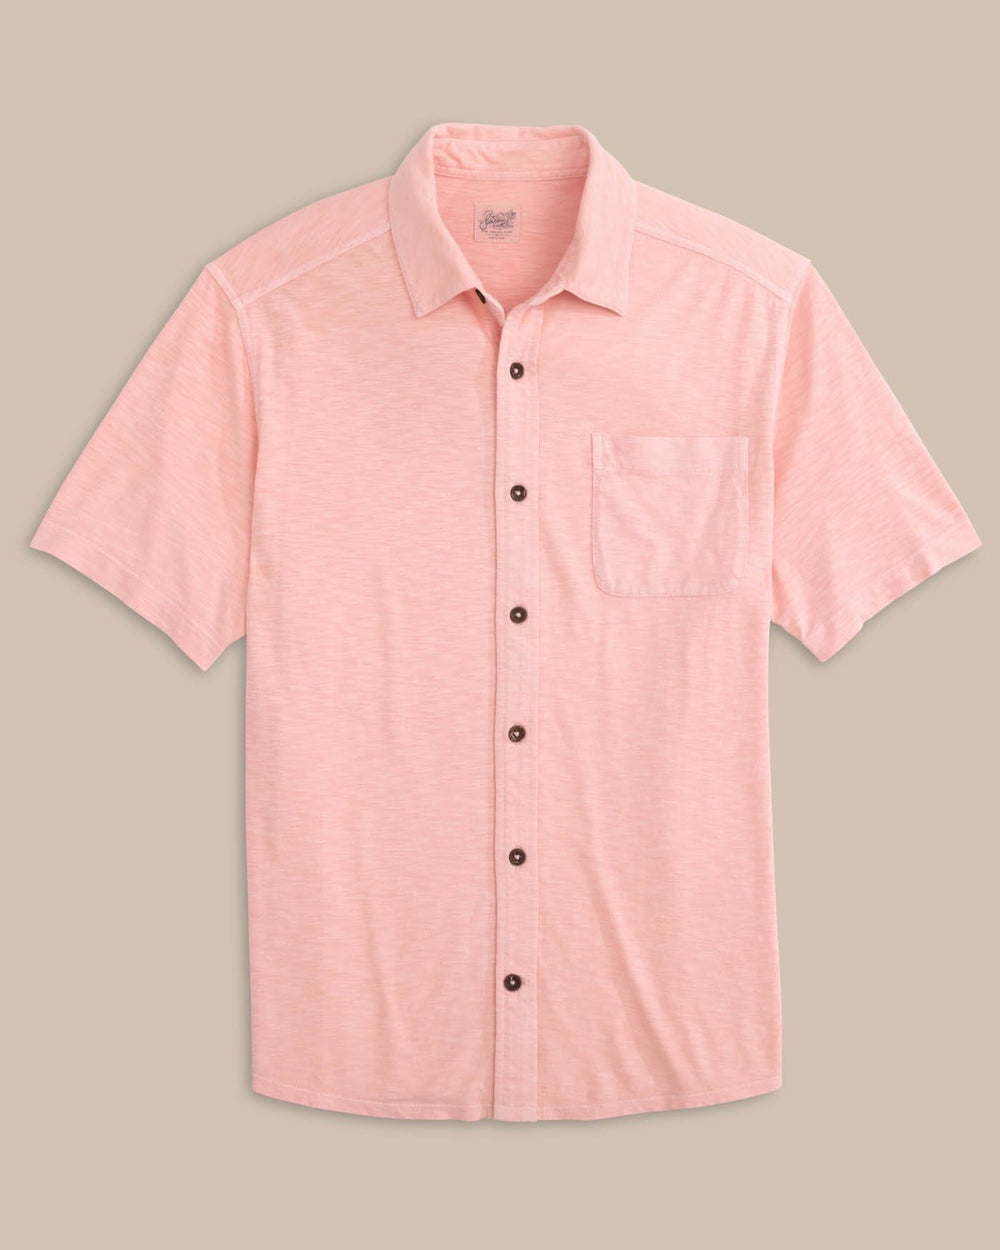 The front view of the Southern Tide Beachcast Solid Knit Short Sleeve Sport Shirt by Southern Tide - Pale Rosette Pink